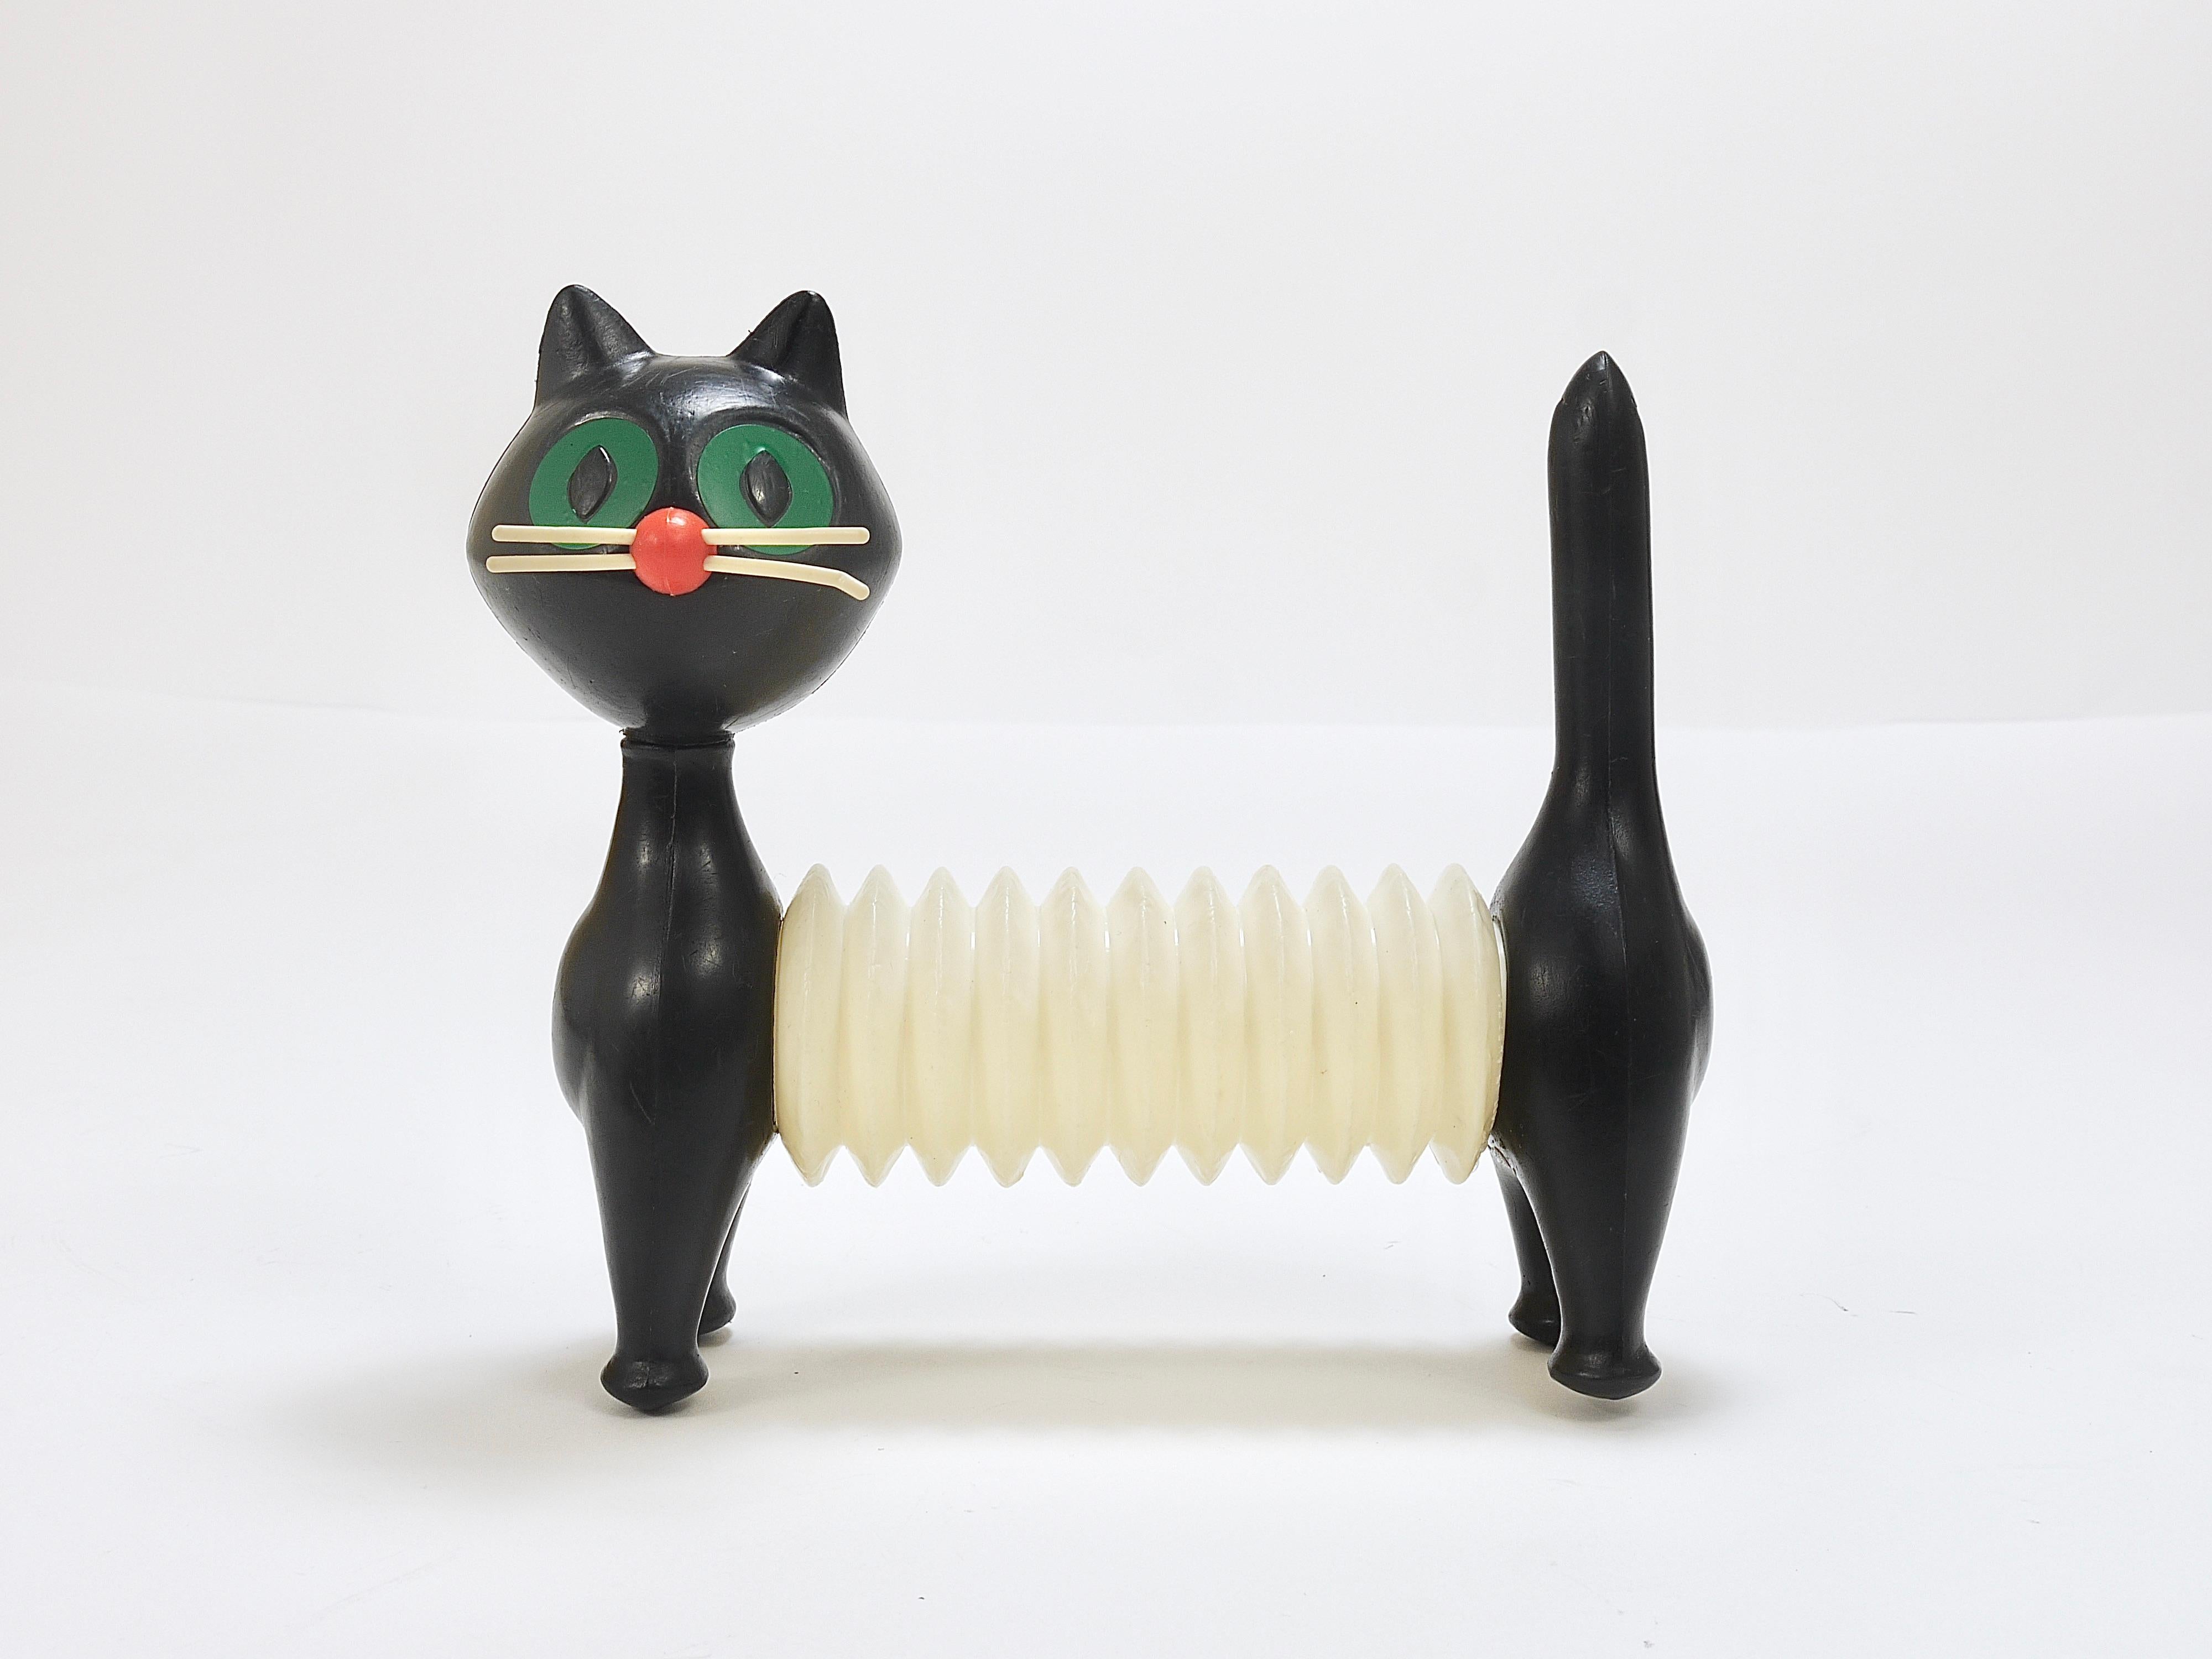 Libuse Niklova Accordion Squeaky Toy Cat „Tomcat“ by Fatra, Czechoslovakia 1960s For Sale 7